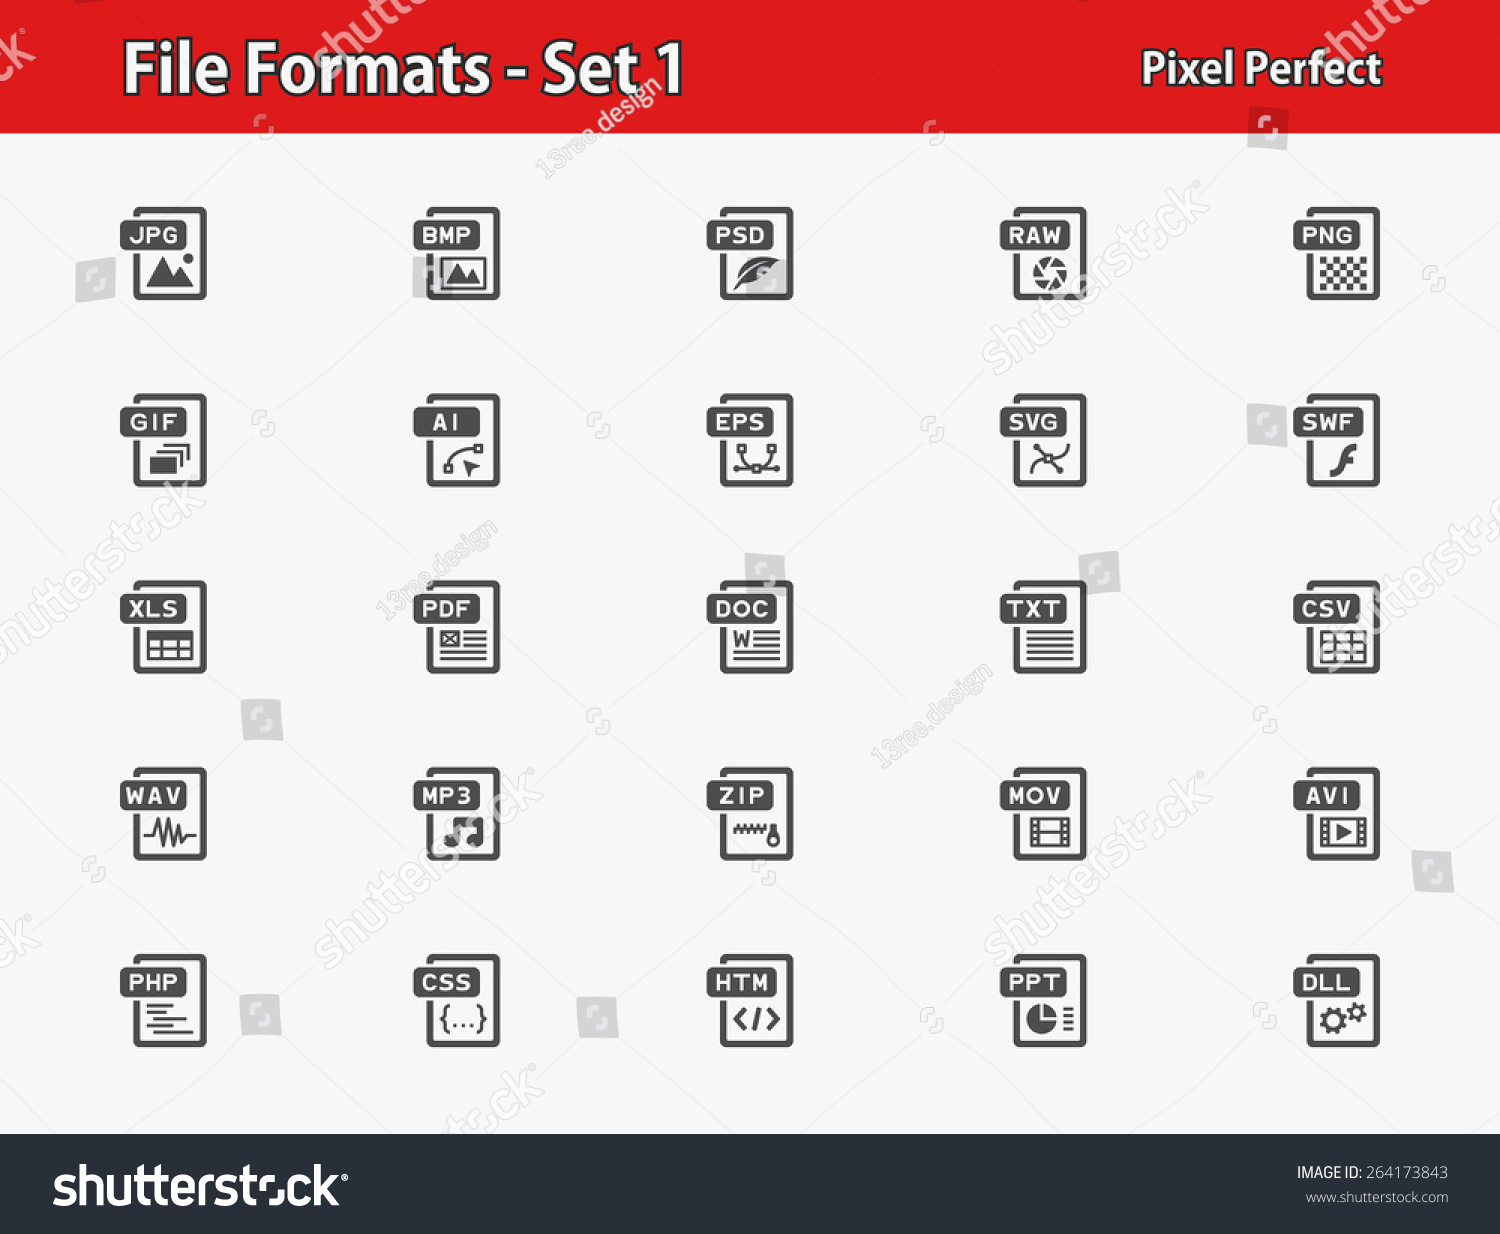 SVG of File Formats Icons. Professional, pixel perfect icons optimized for both large and small resolutions. EPS 8 format. svg